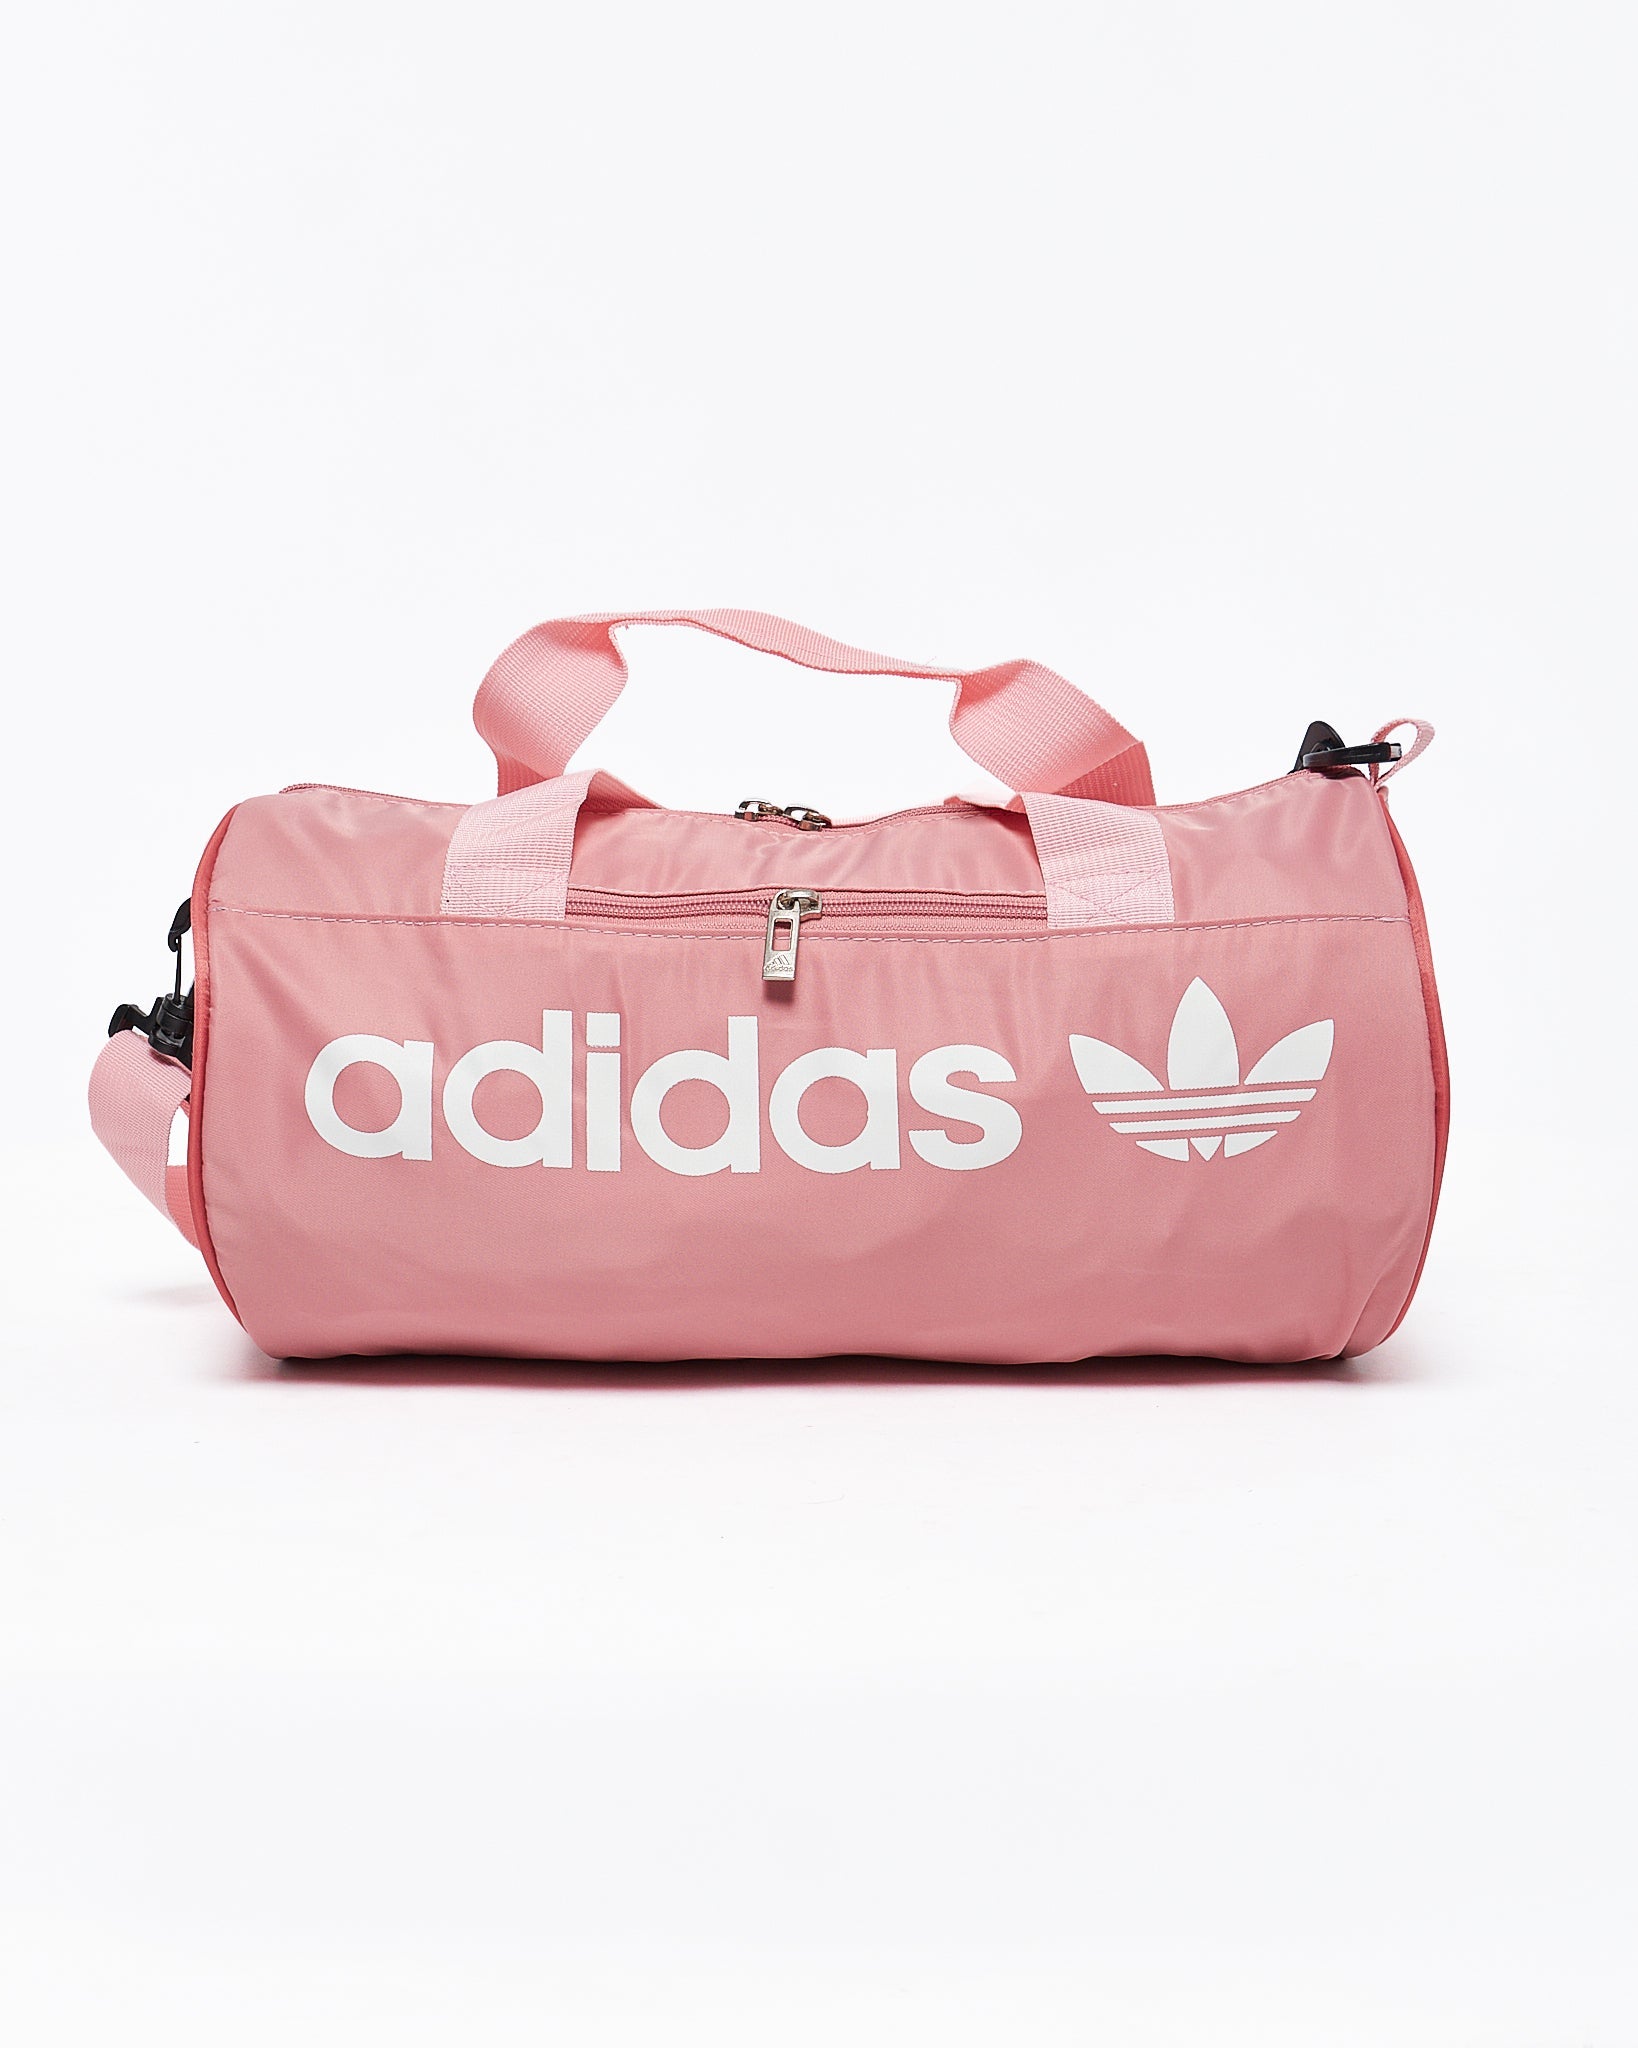 MOI OUTFIT-AD Logo Printed Unisex Duffle Bag 18.90